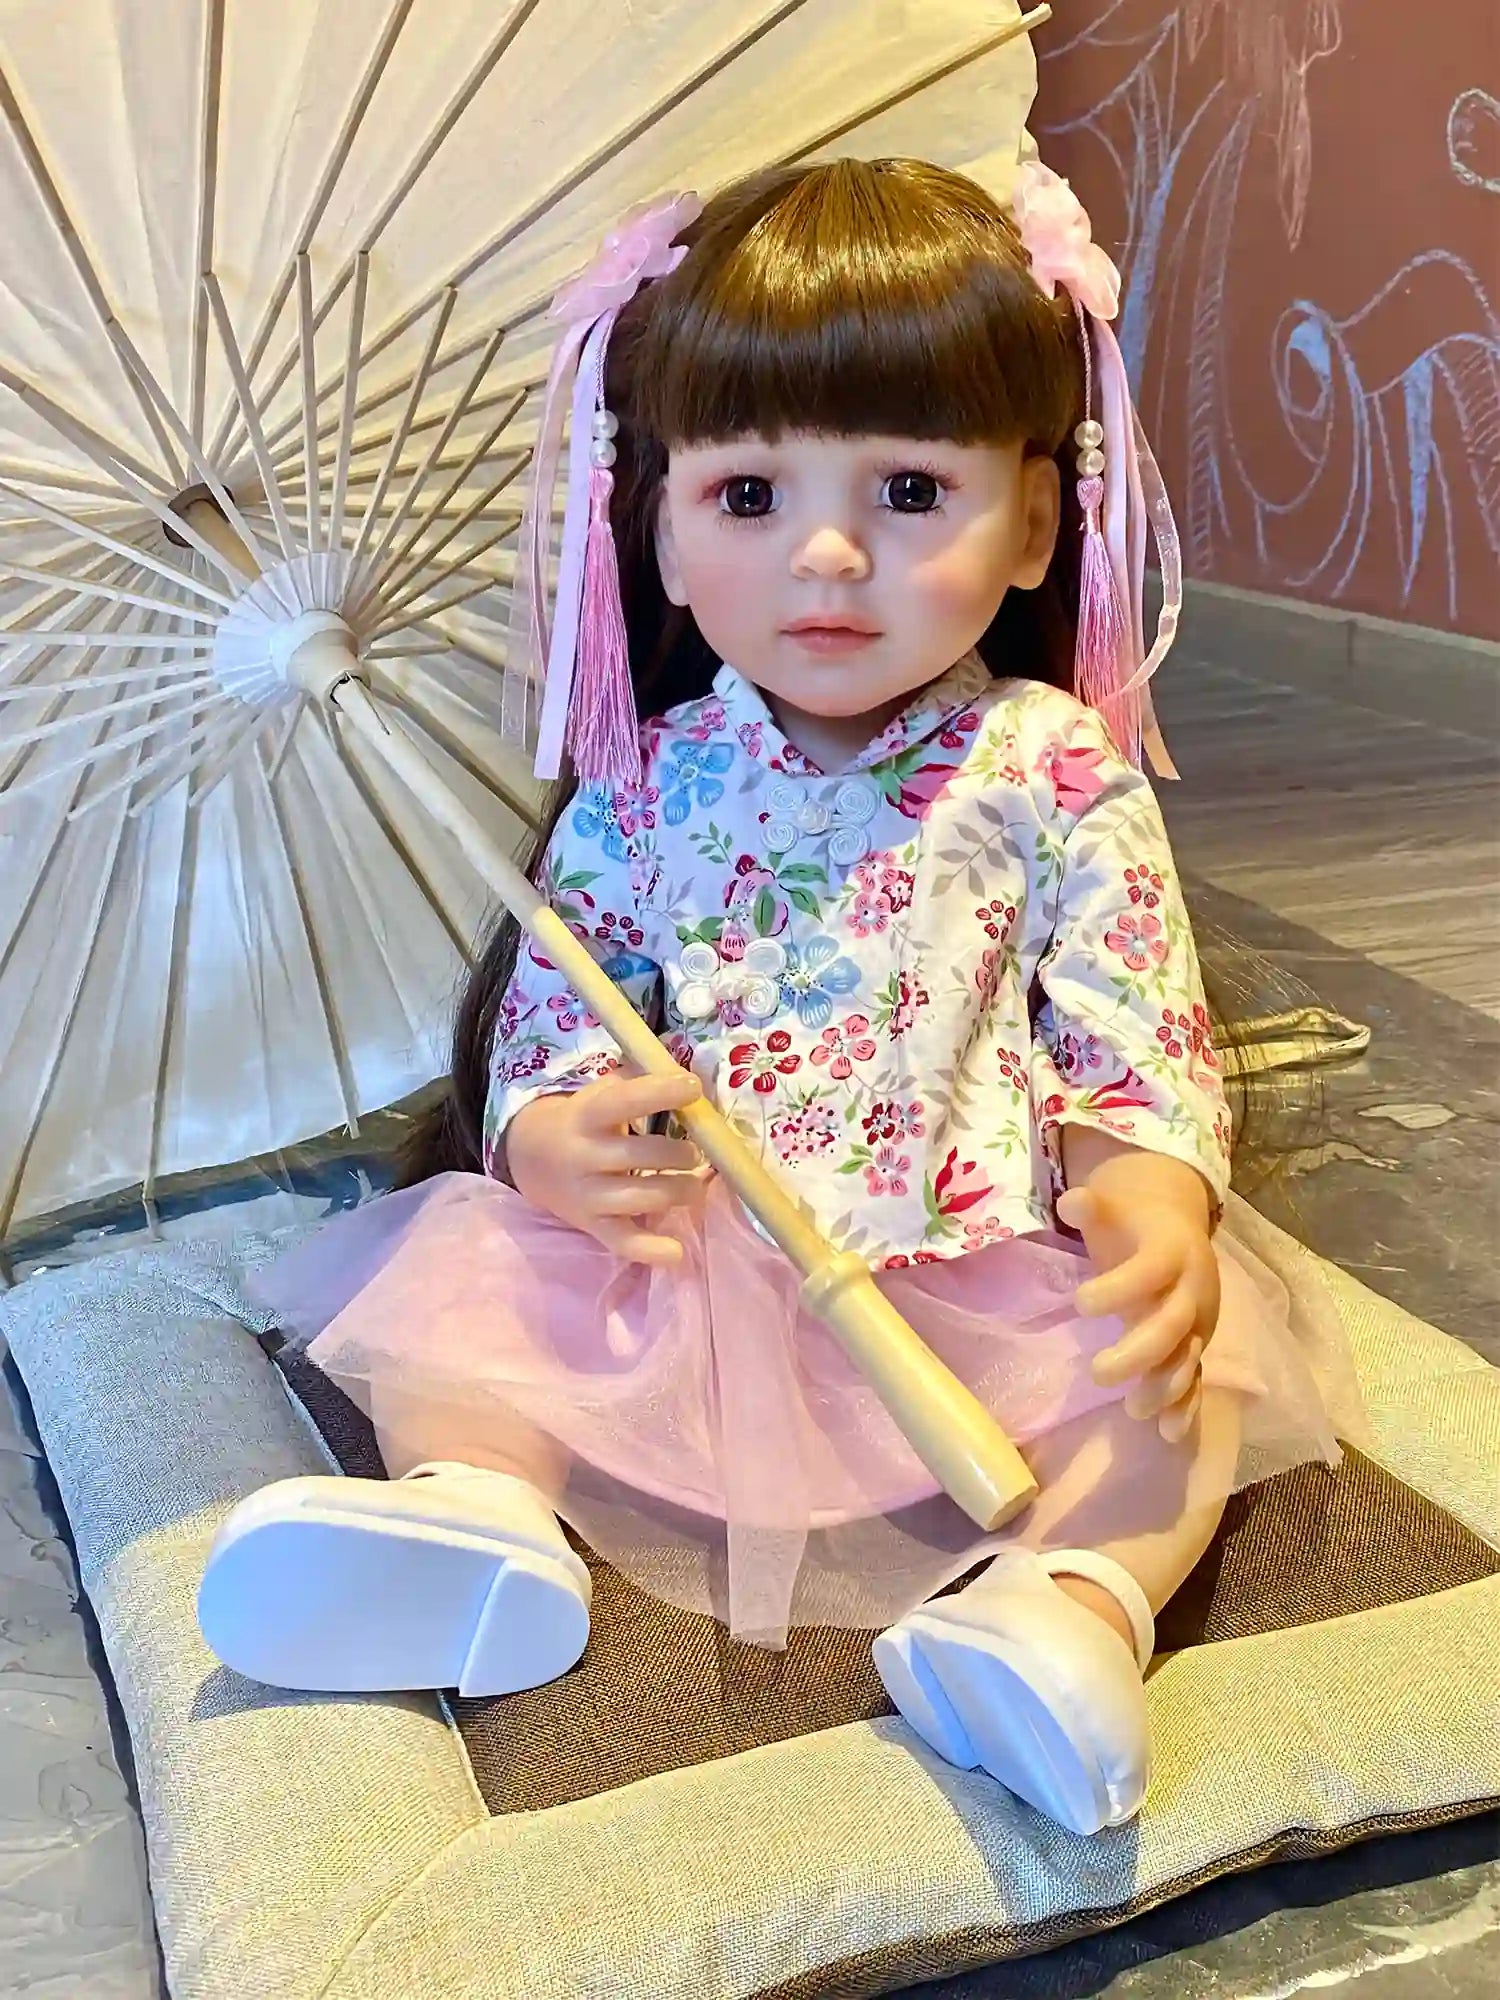 Toddler doll in a seated position, wearing a pink and white floral kimono dress and pink tulle skirt, holding a pink ribbon, with a playful expression.